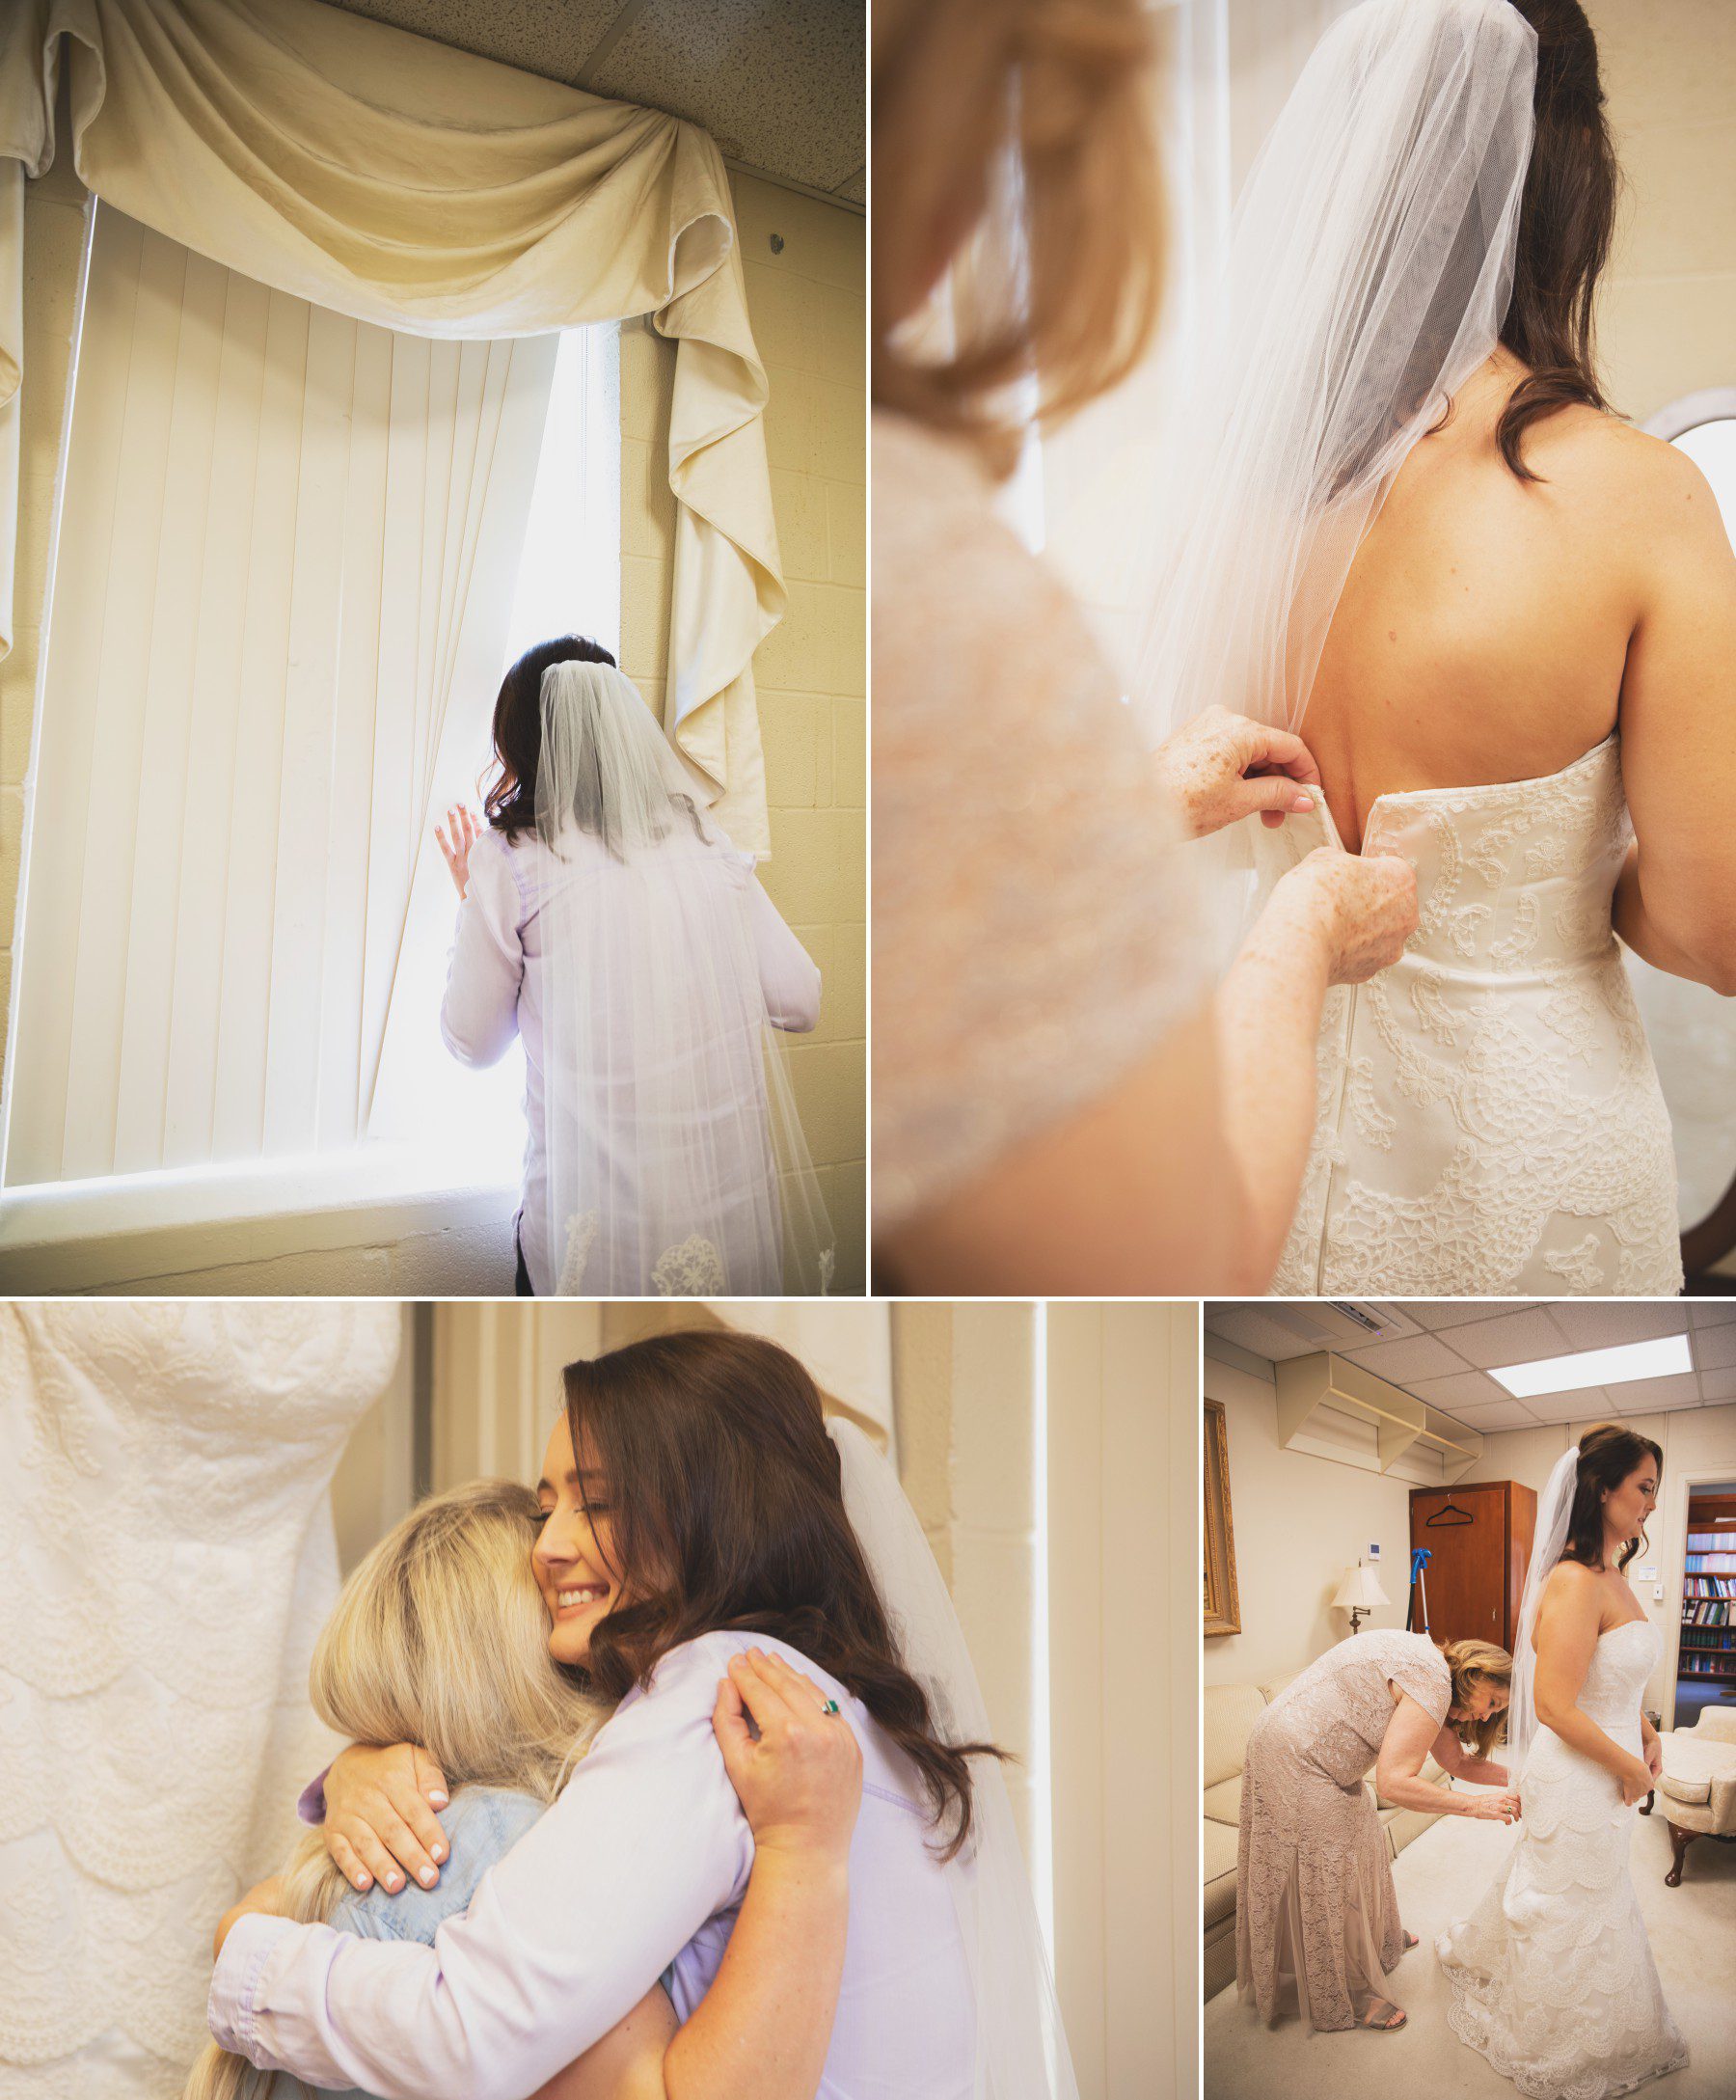 Wedding photography bride gets ready at church with bridesmaid and family before wedding ceremony at Blakemore United Methodist in Nashville TN